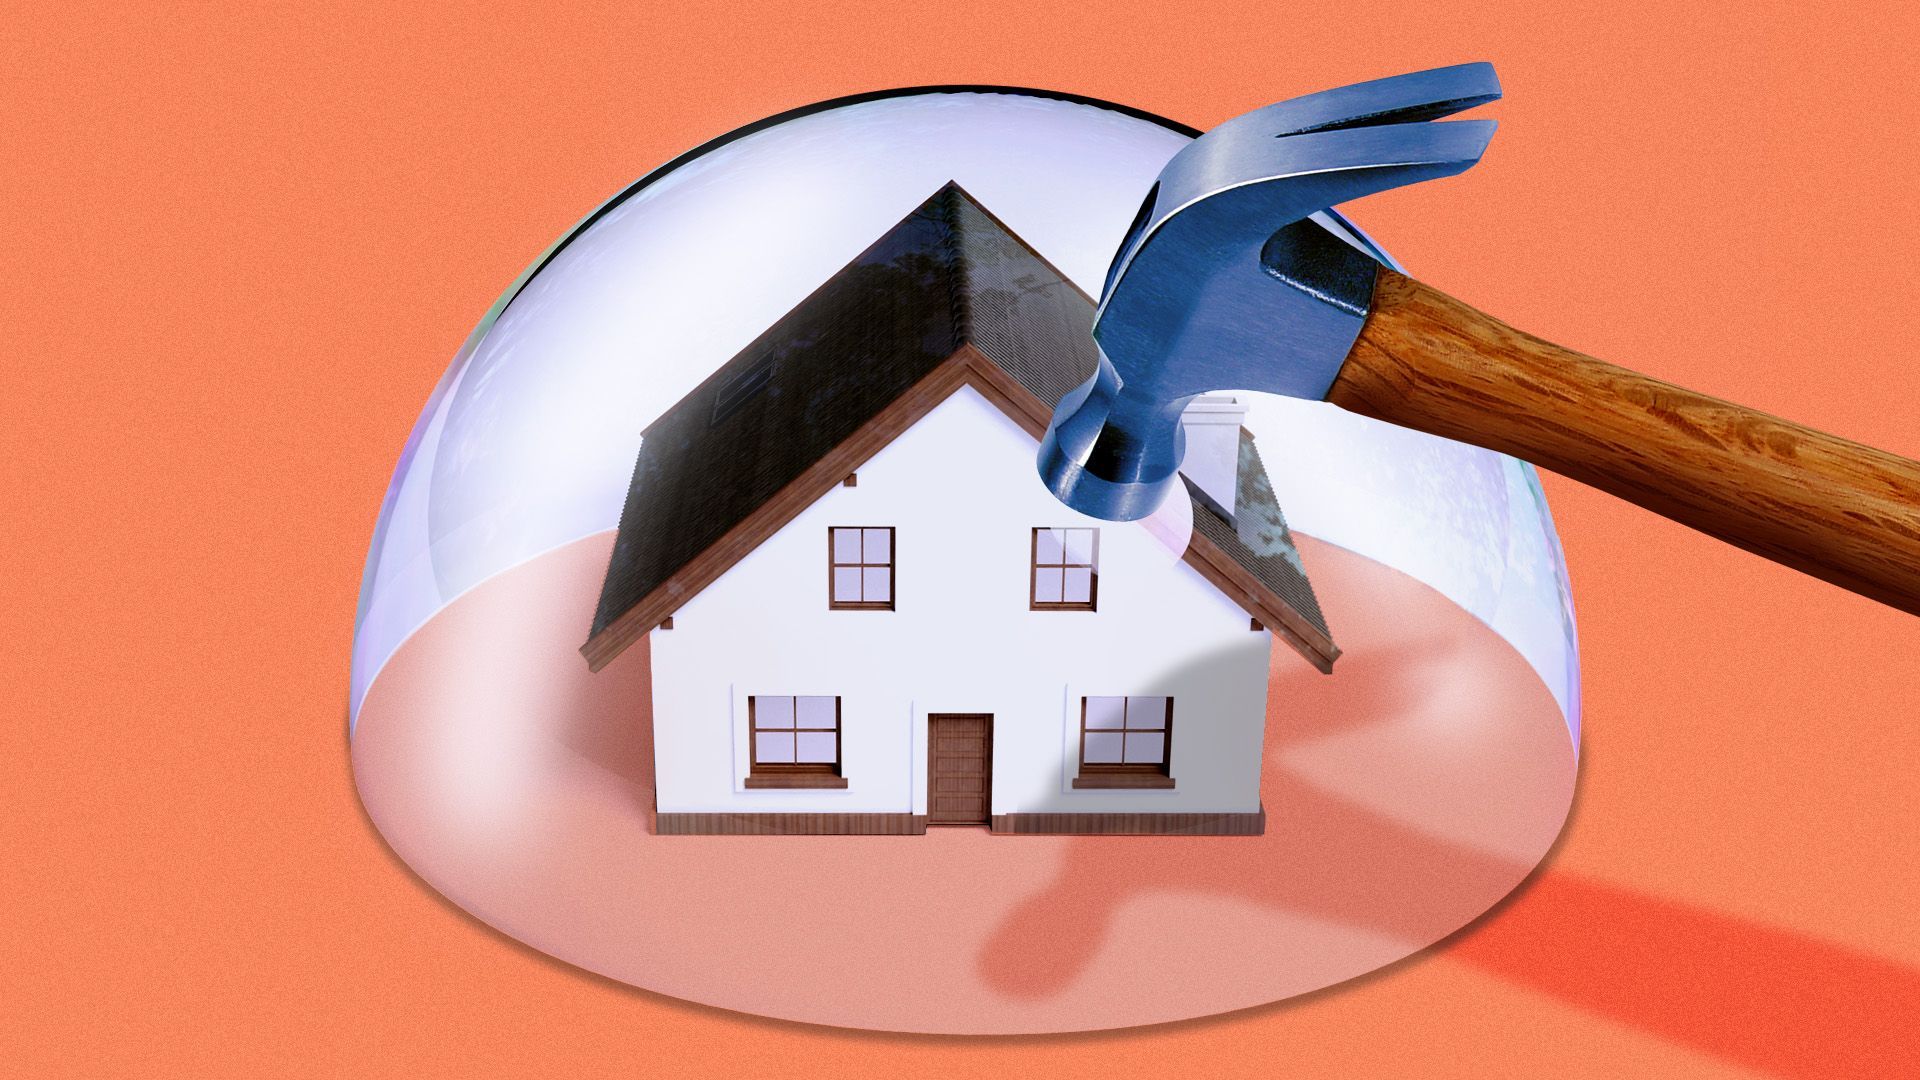 Illustration of a small house under a glass dome with a hammer hovering above